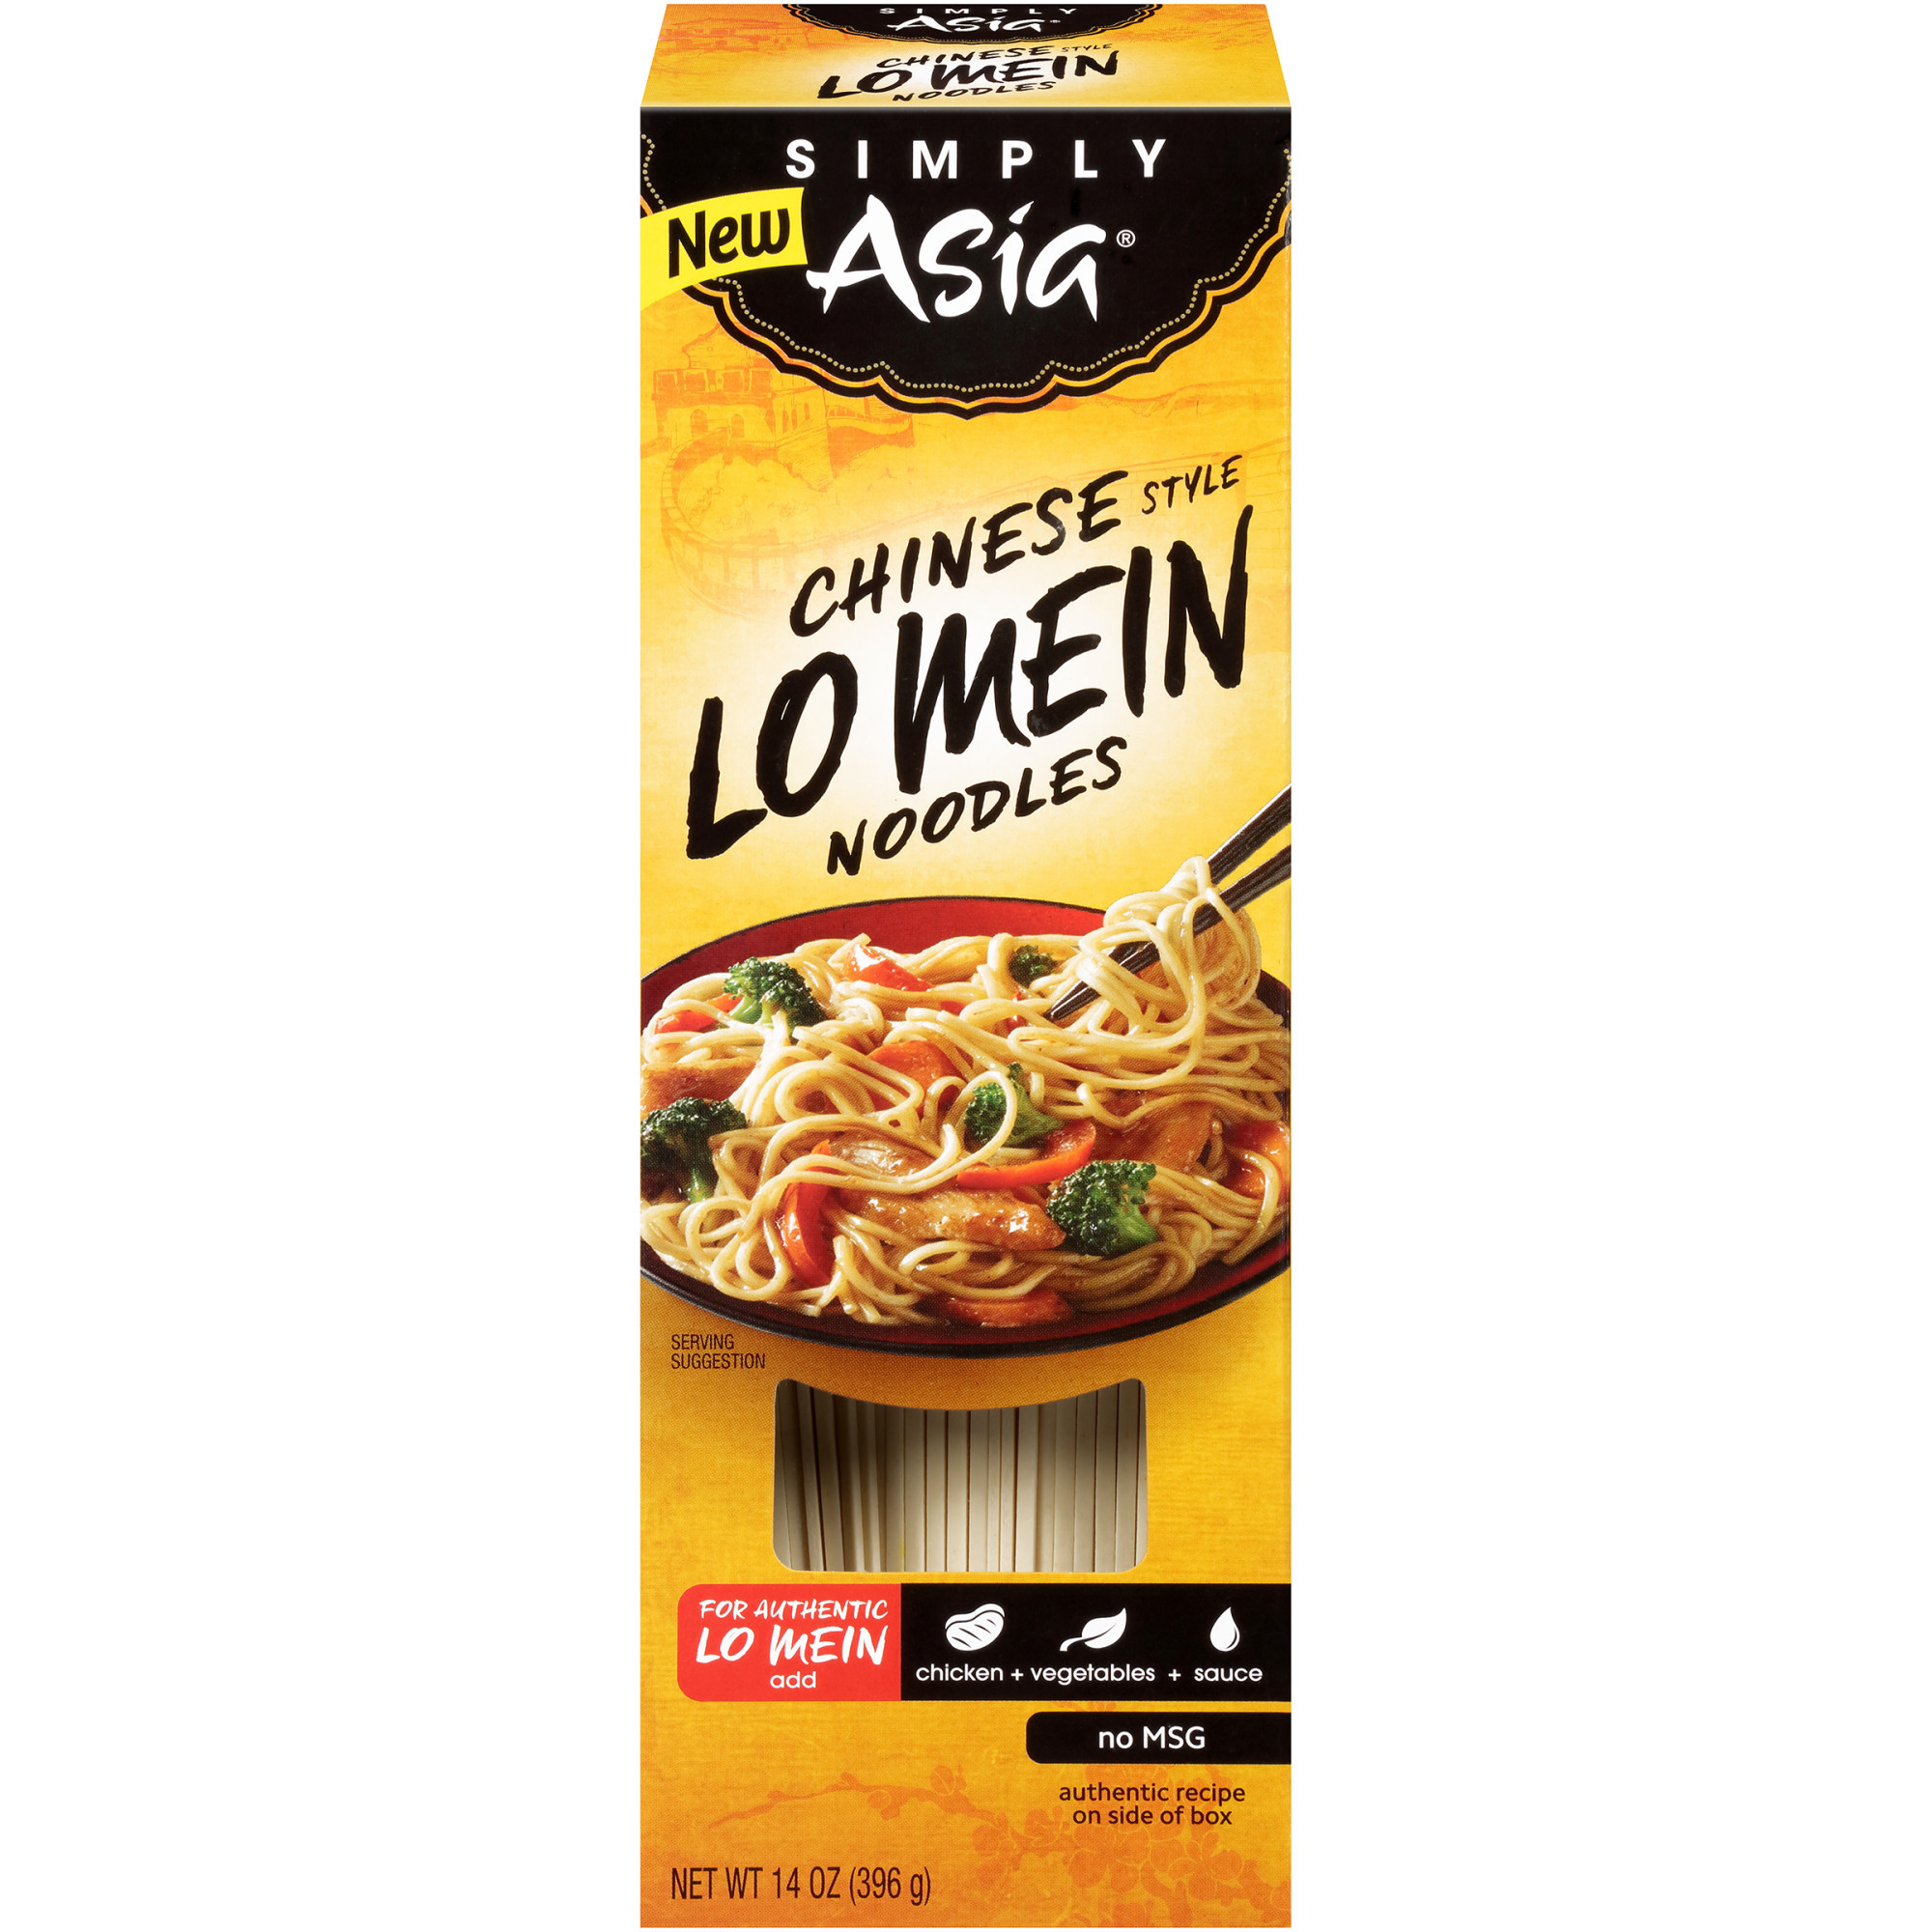 Asian Noodles Walmart
 Simply Asia Chinese Style Lo Mein Noodles 14 oz Walmart